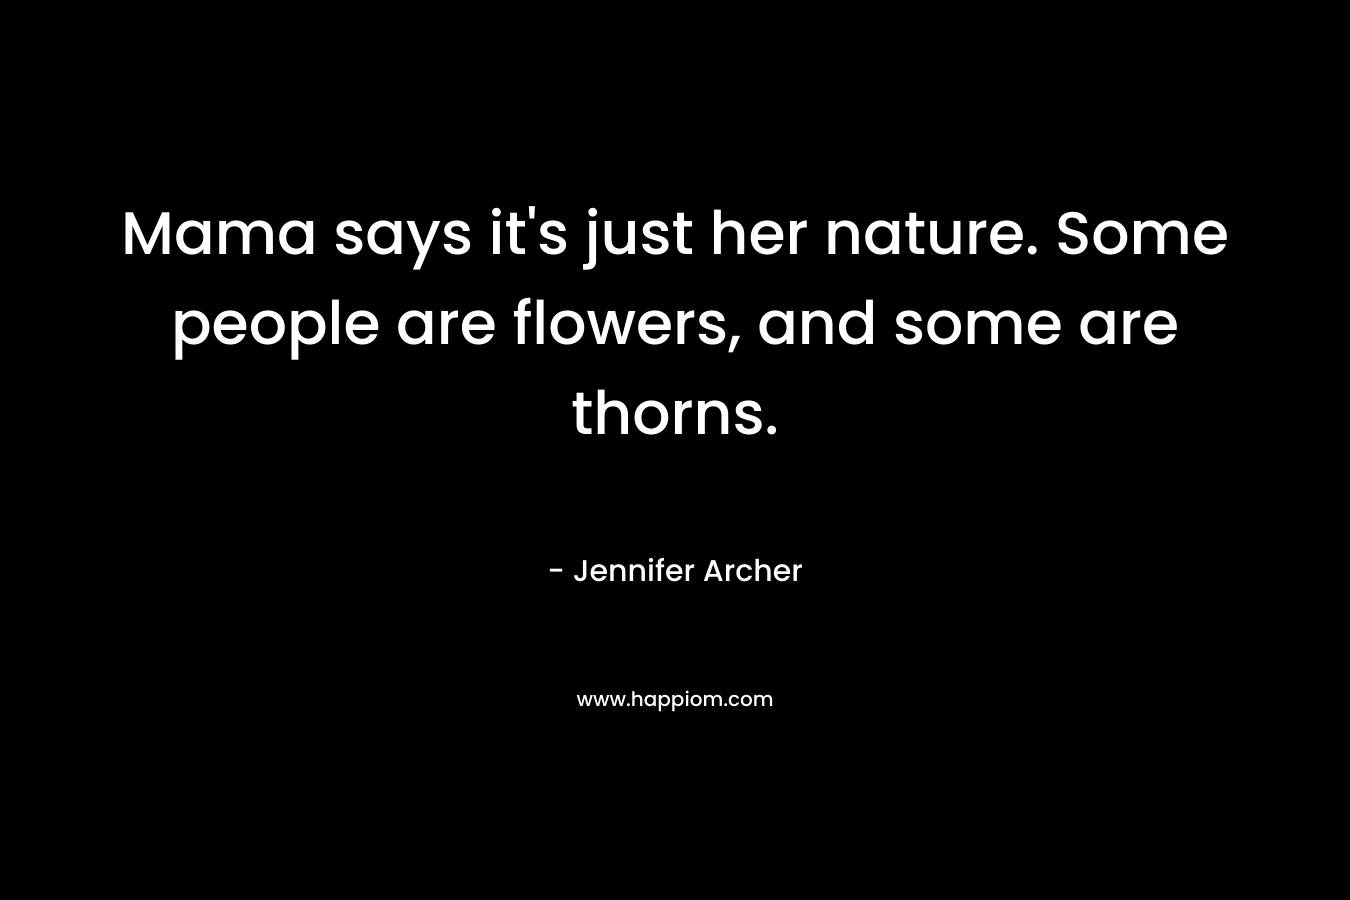 Mama says it’s just her nature. Some people are flowers, and some are thorns. – Jennifer Archer